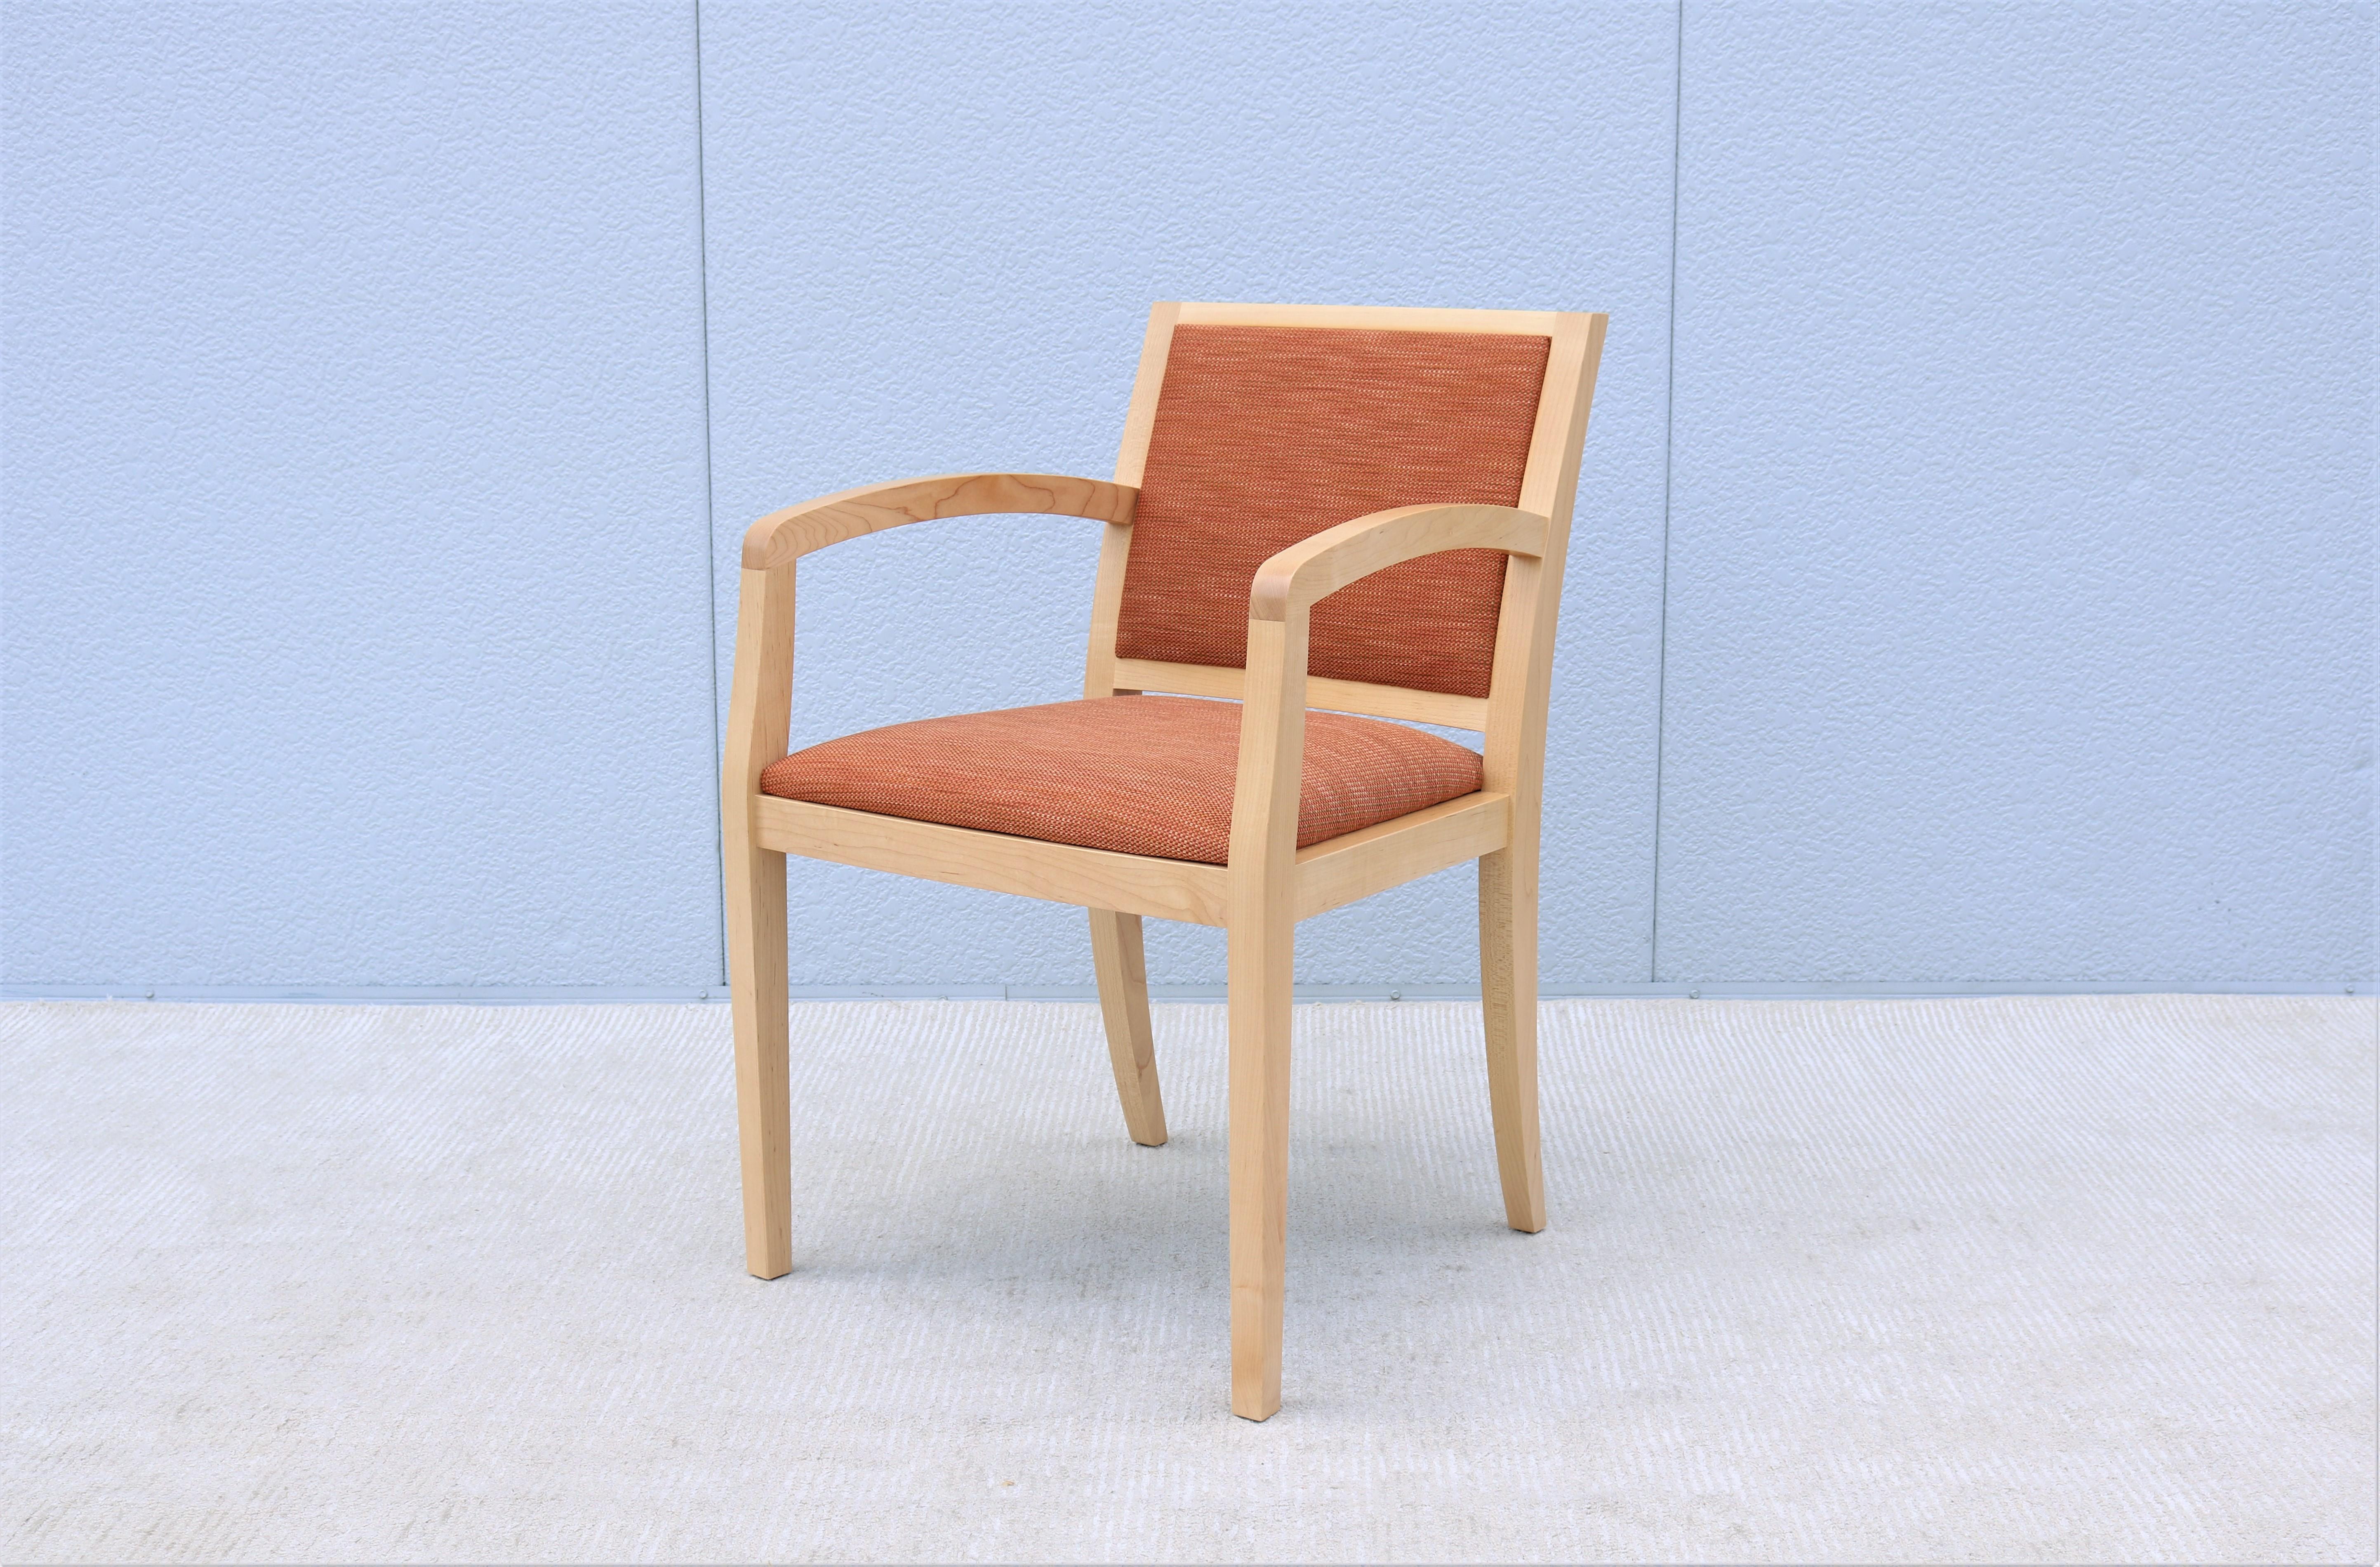 The Collegeville wood side chair by Geiger is elegant with a melding of past and present.
This fabulous clean-lined chair is appropriate for residential and commercial use. 
Very versatile can be used in unlimited settings, as dining, side or guest